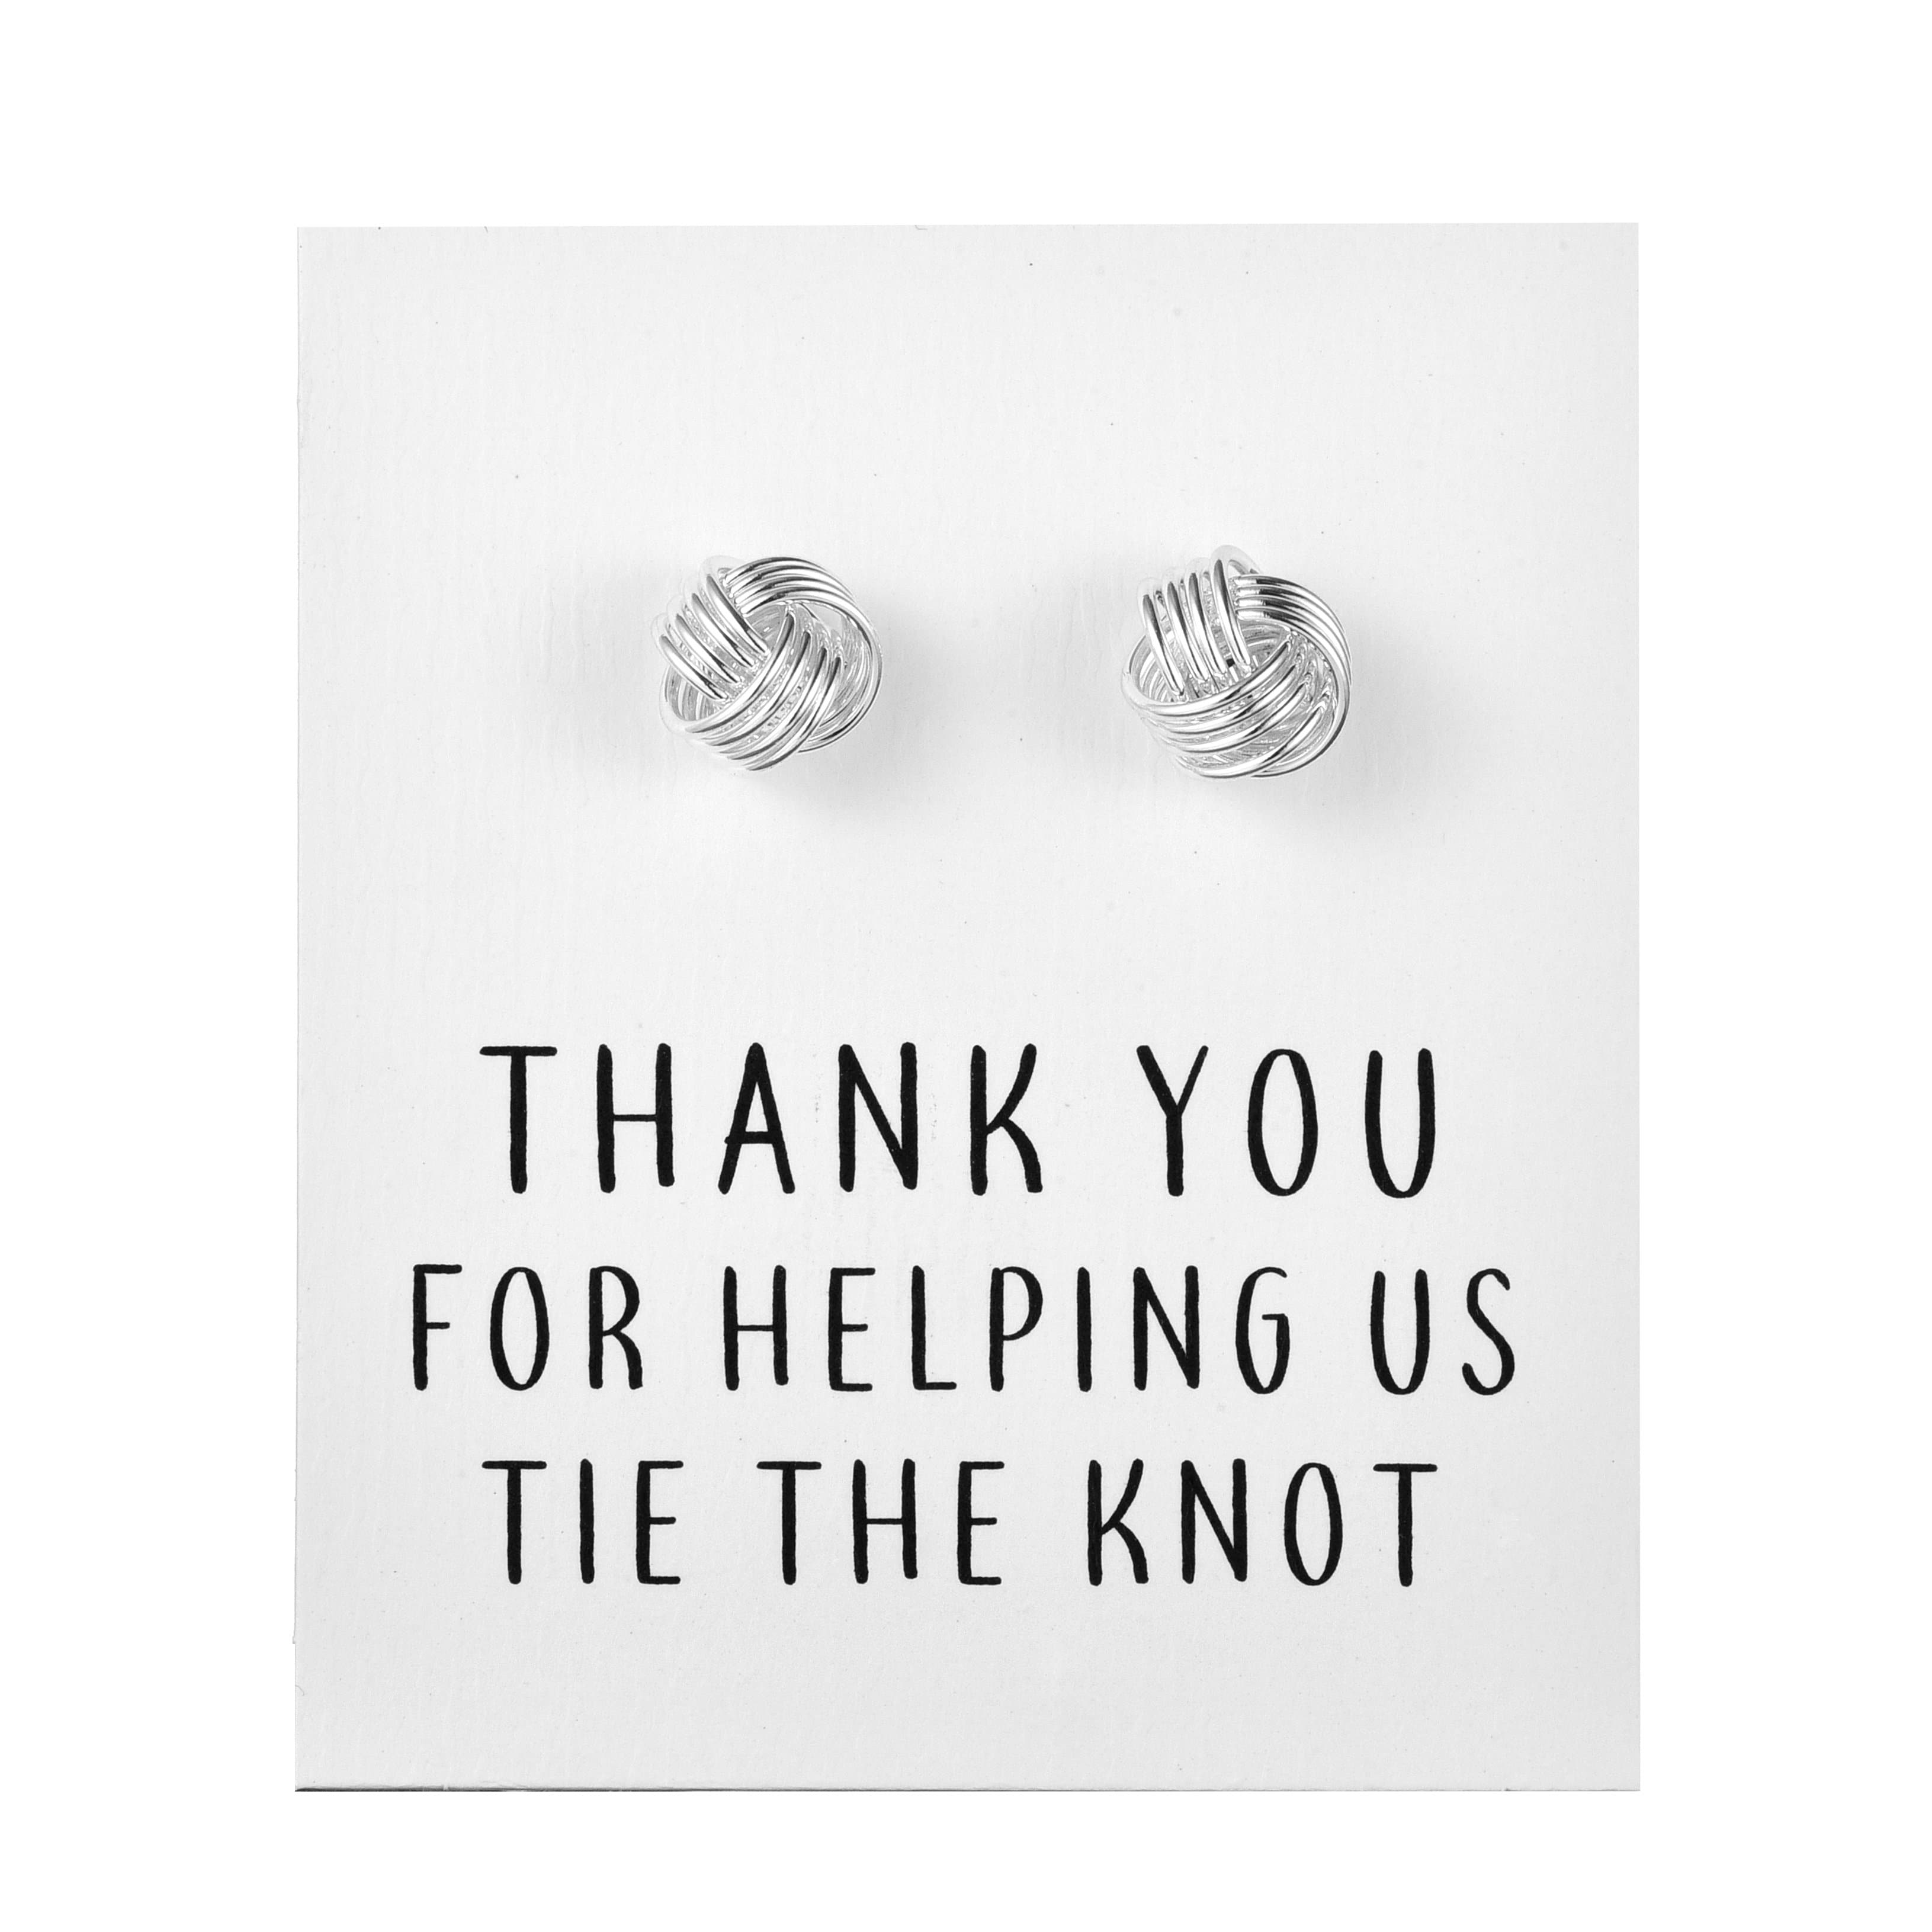 Thank You for Helping us Tie The Knot Cufflinks by Philip Jones Jewellery